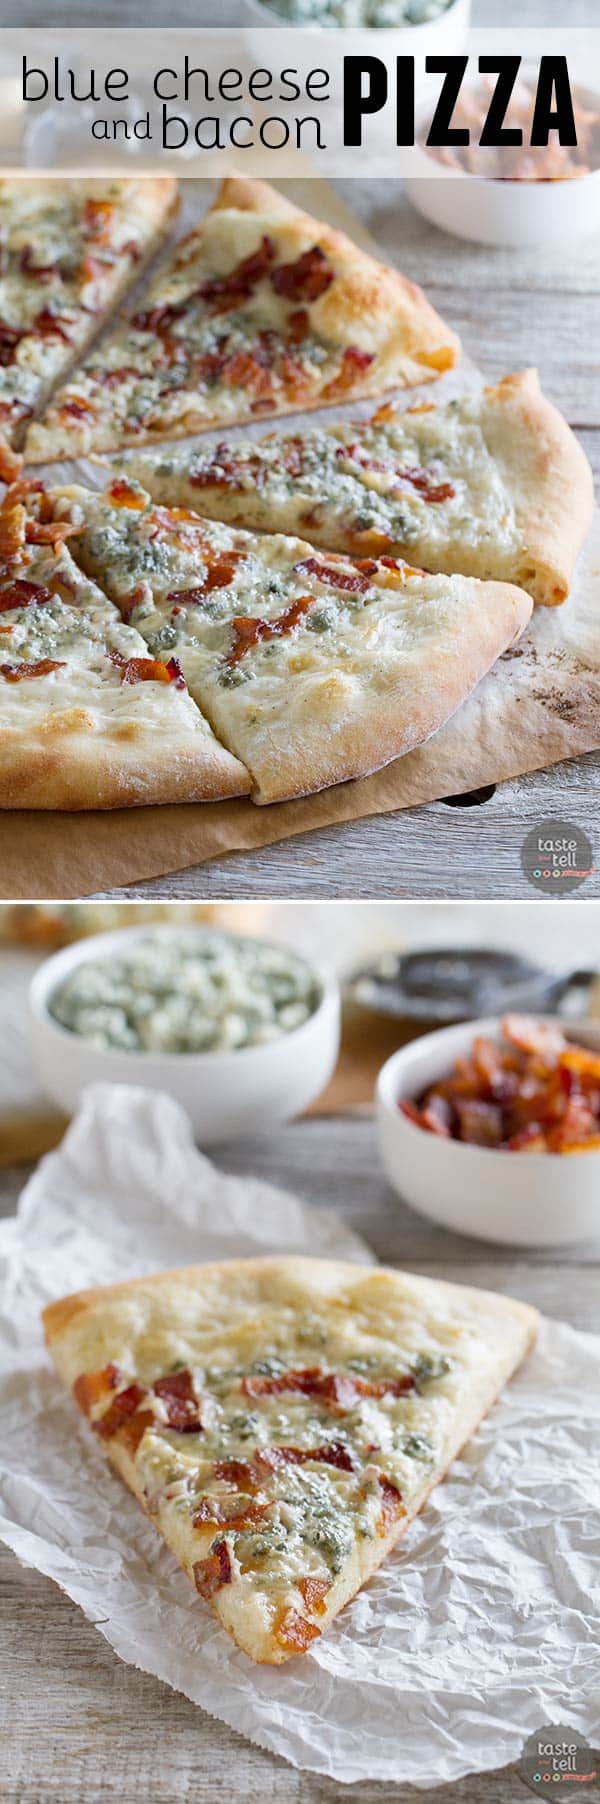 Change up your Friday night pizza with this Blue Cheese and Bacon Pizza.  Pizza crust is topped with an easy béchamel sauce, bacon and blue cheese for a gourmet pizza at home.